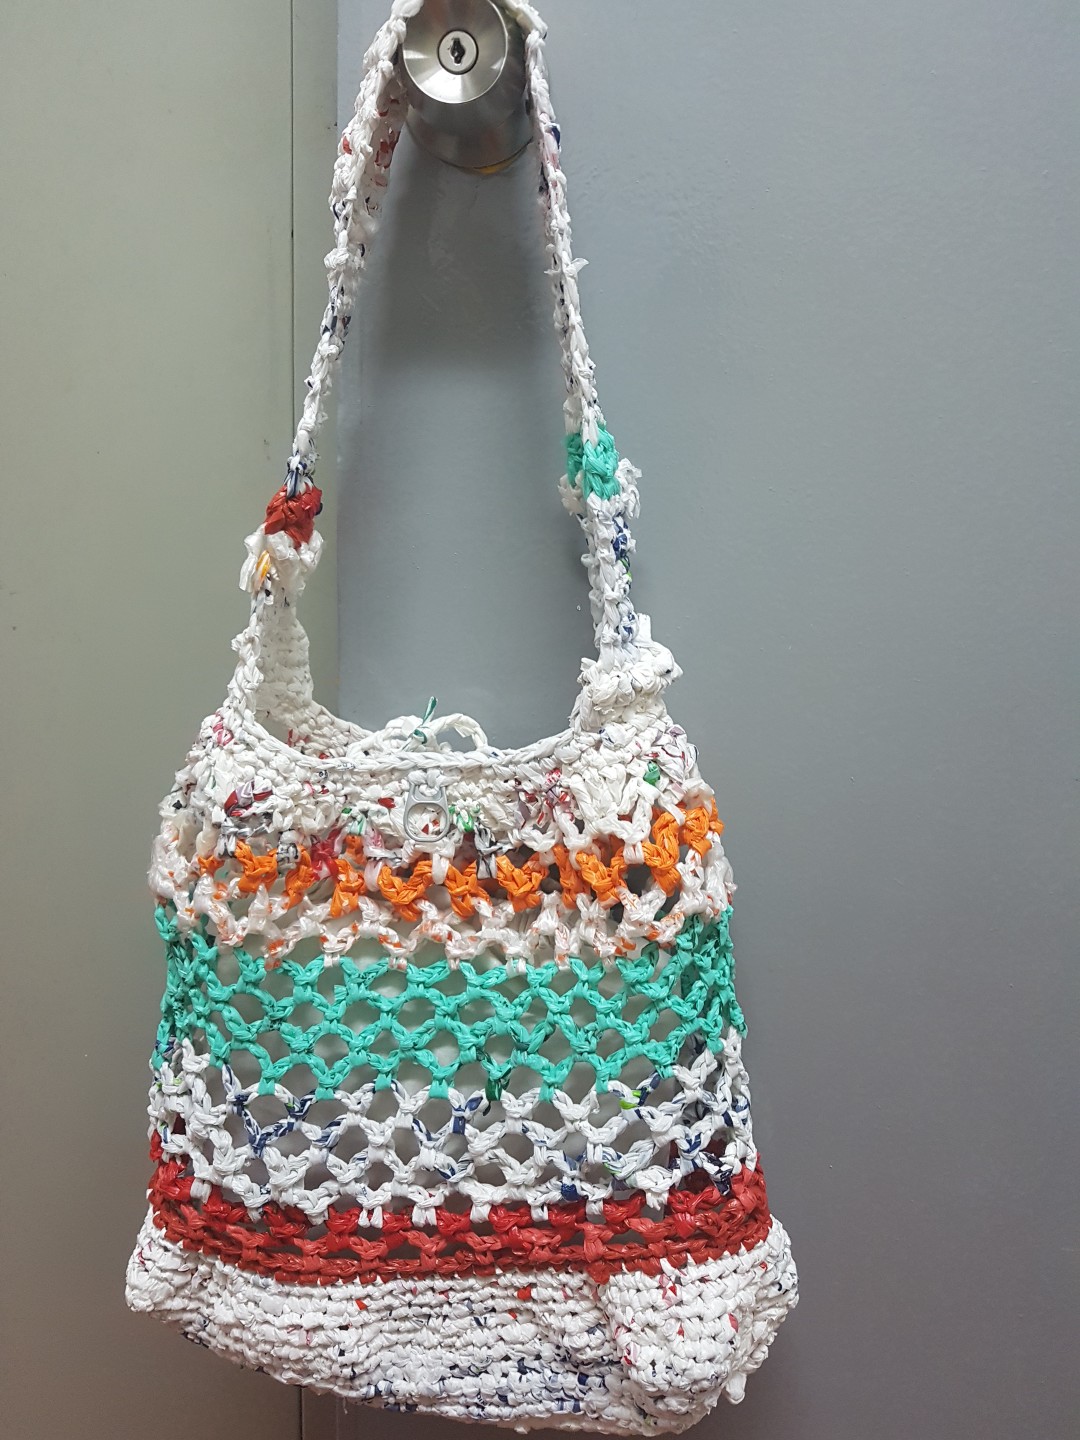 fashion bags made from recycled materials